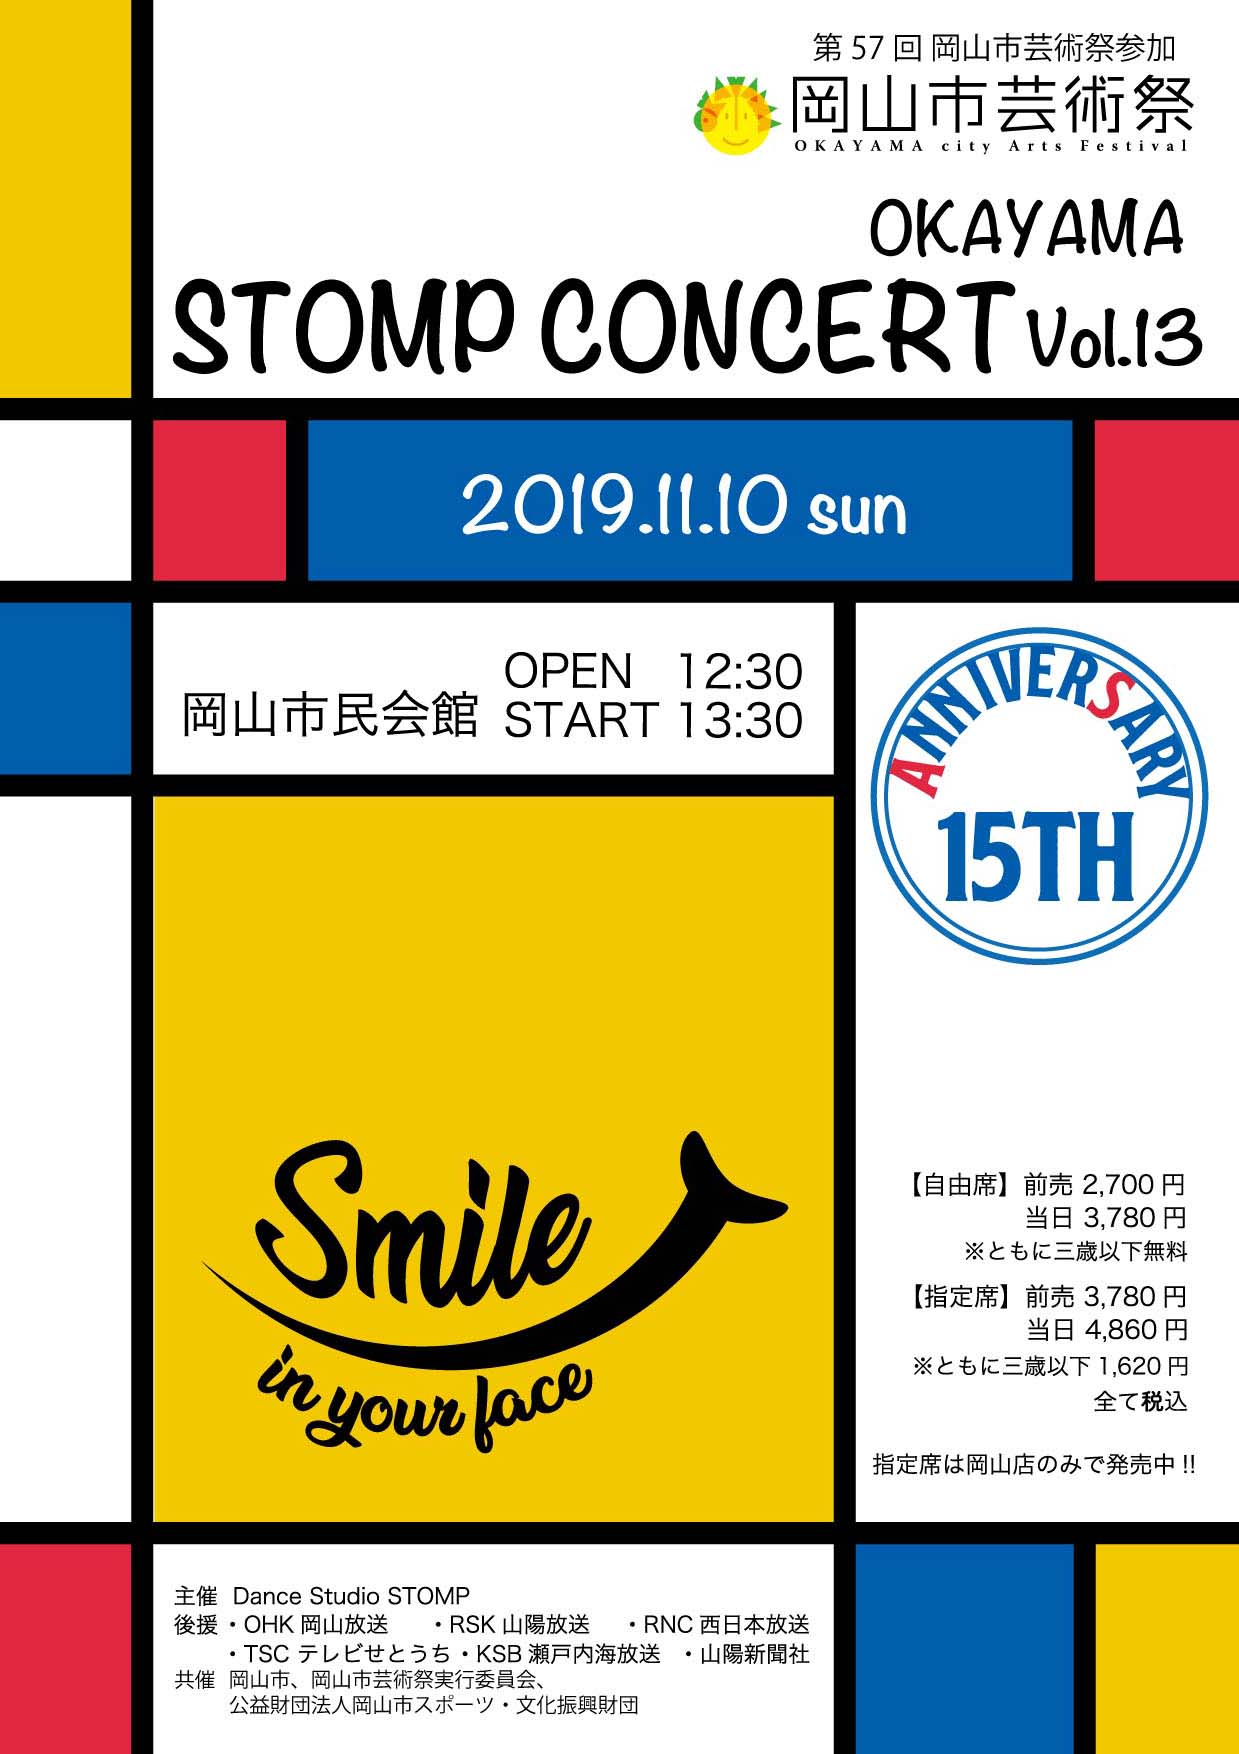 STOMP CONCERT Vol,13 OKAYAMA ～Smile in your face～